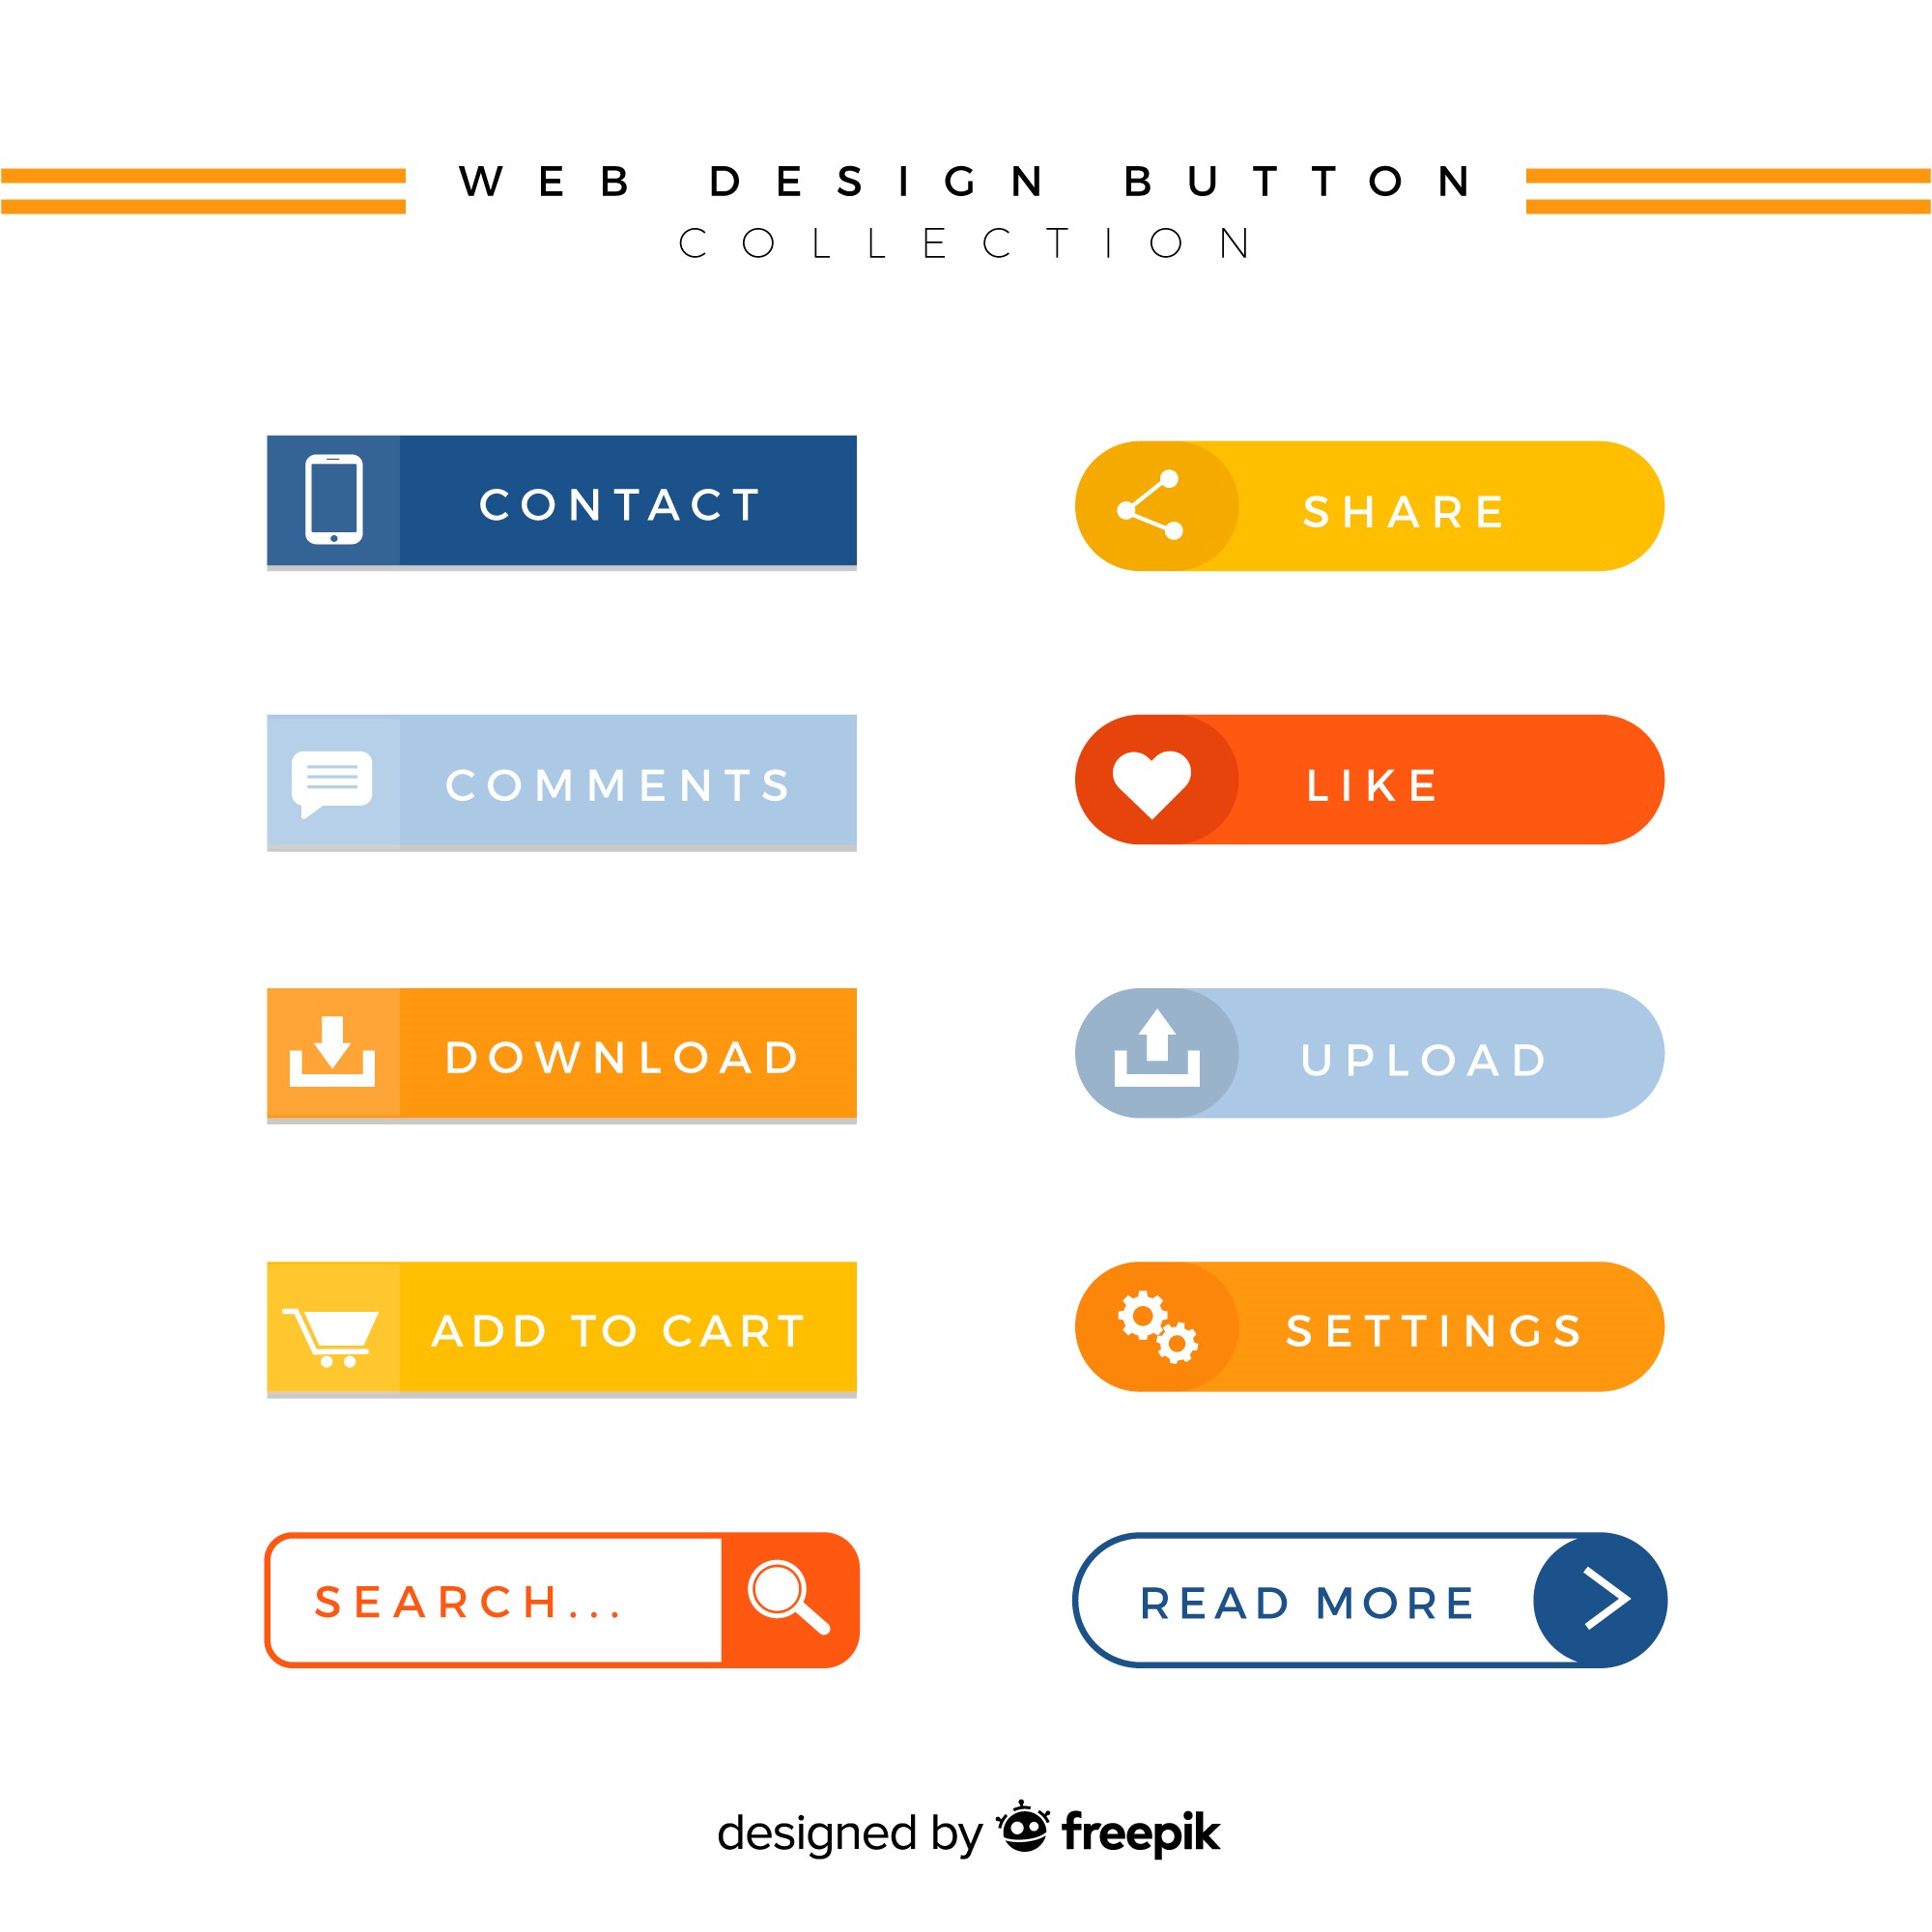 importance of buttons design